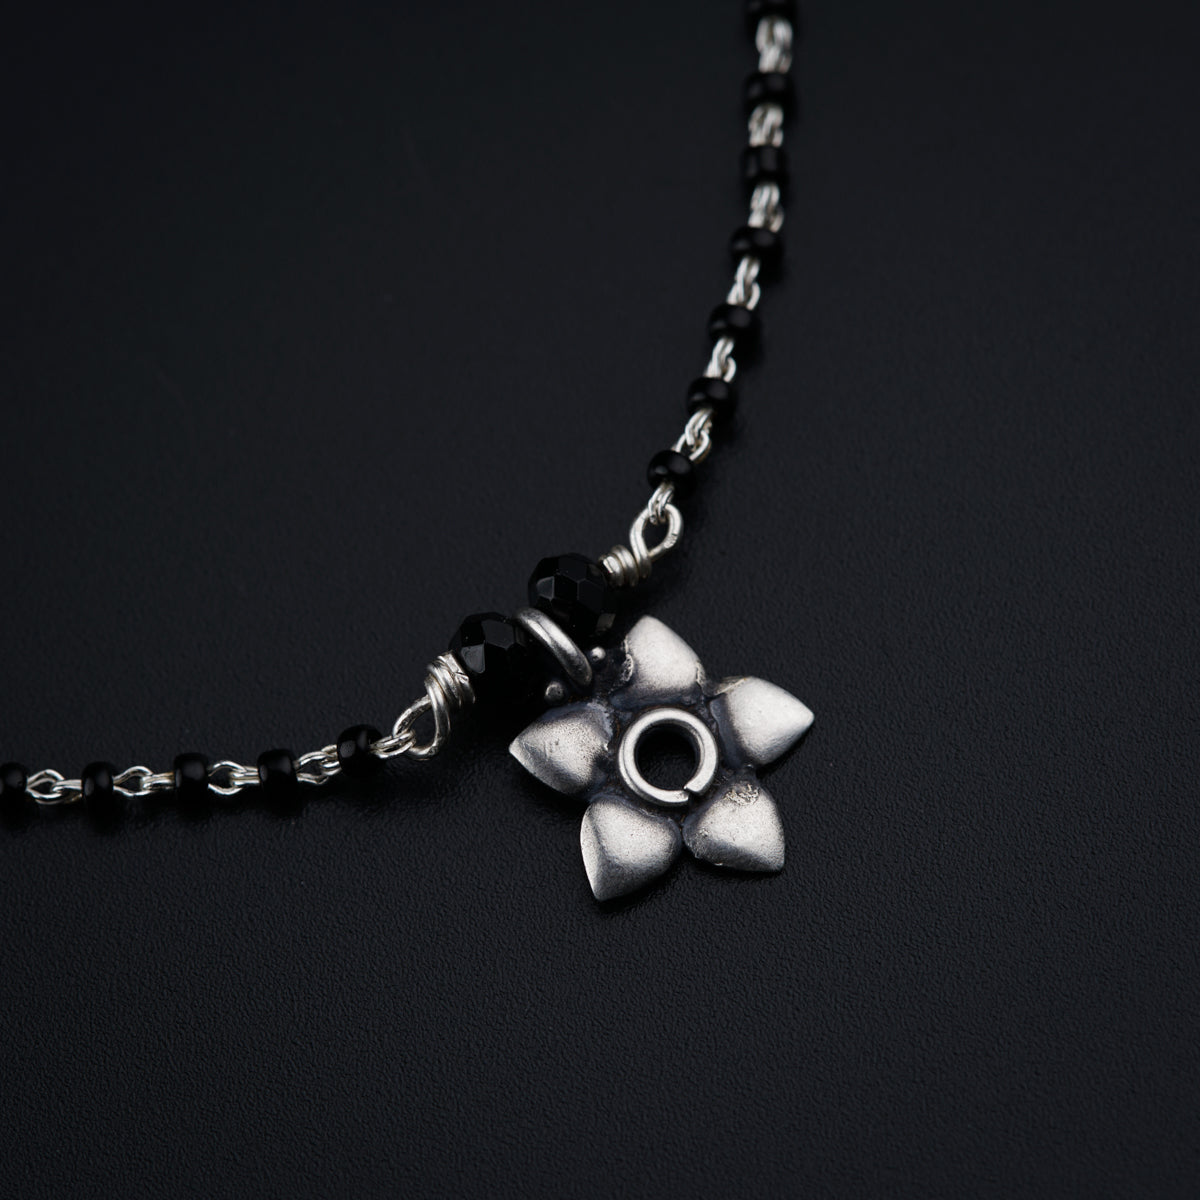 a black and silver necklace with a flower on it